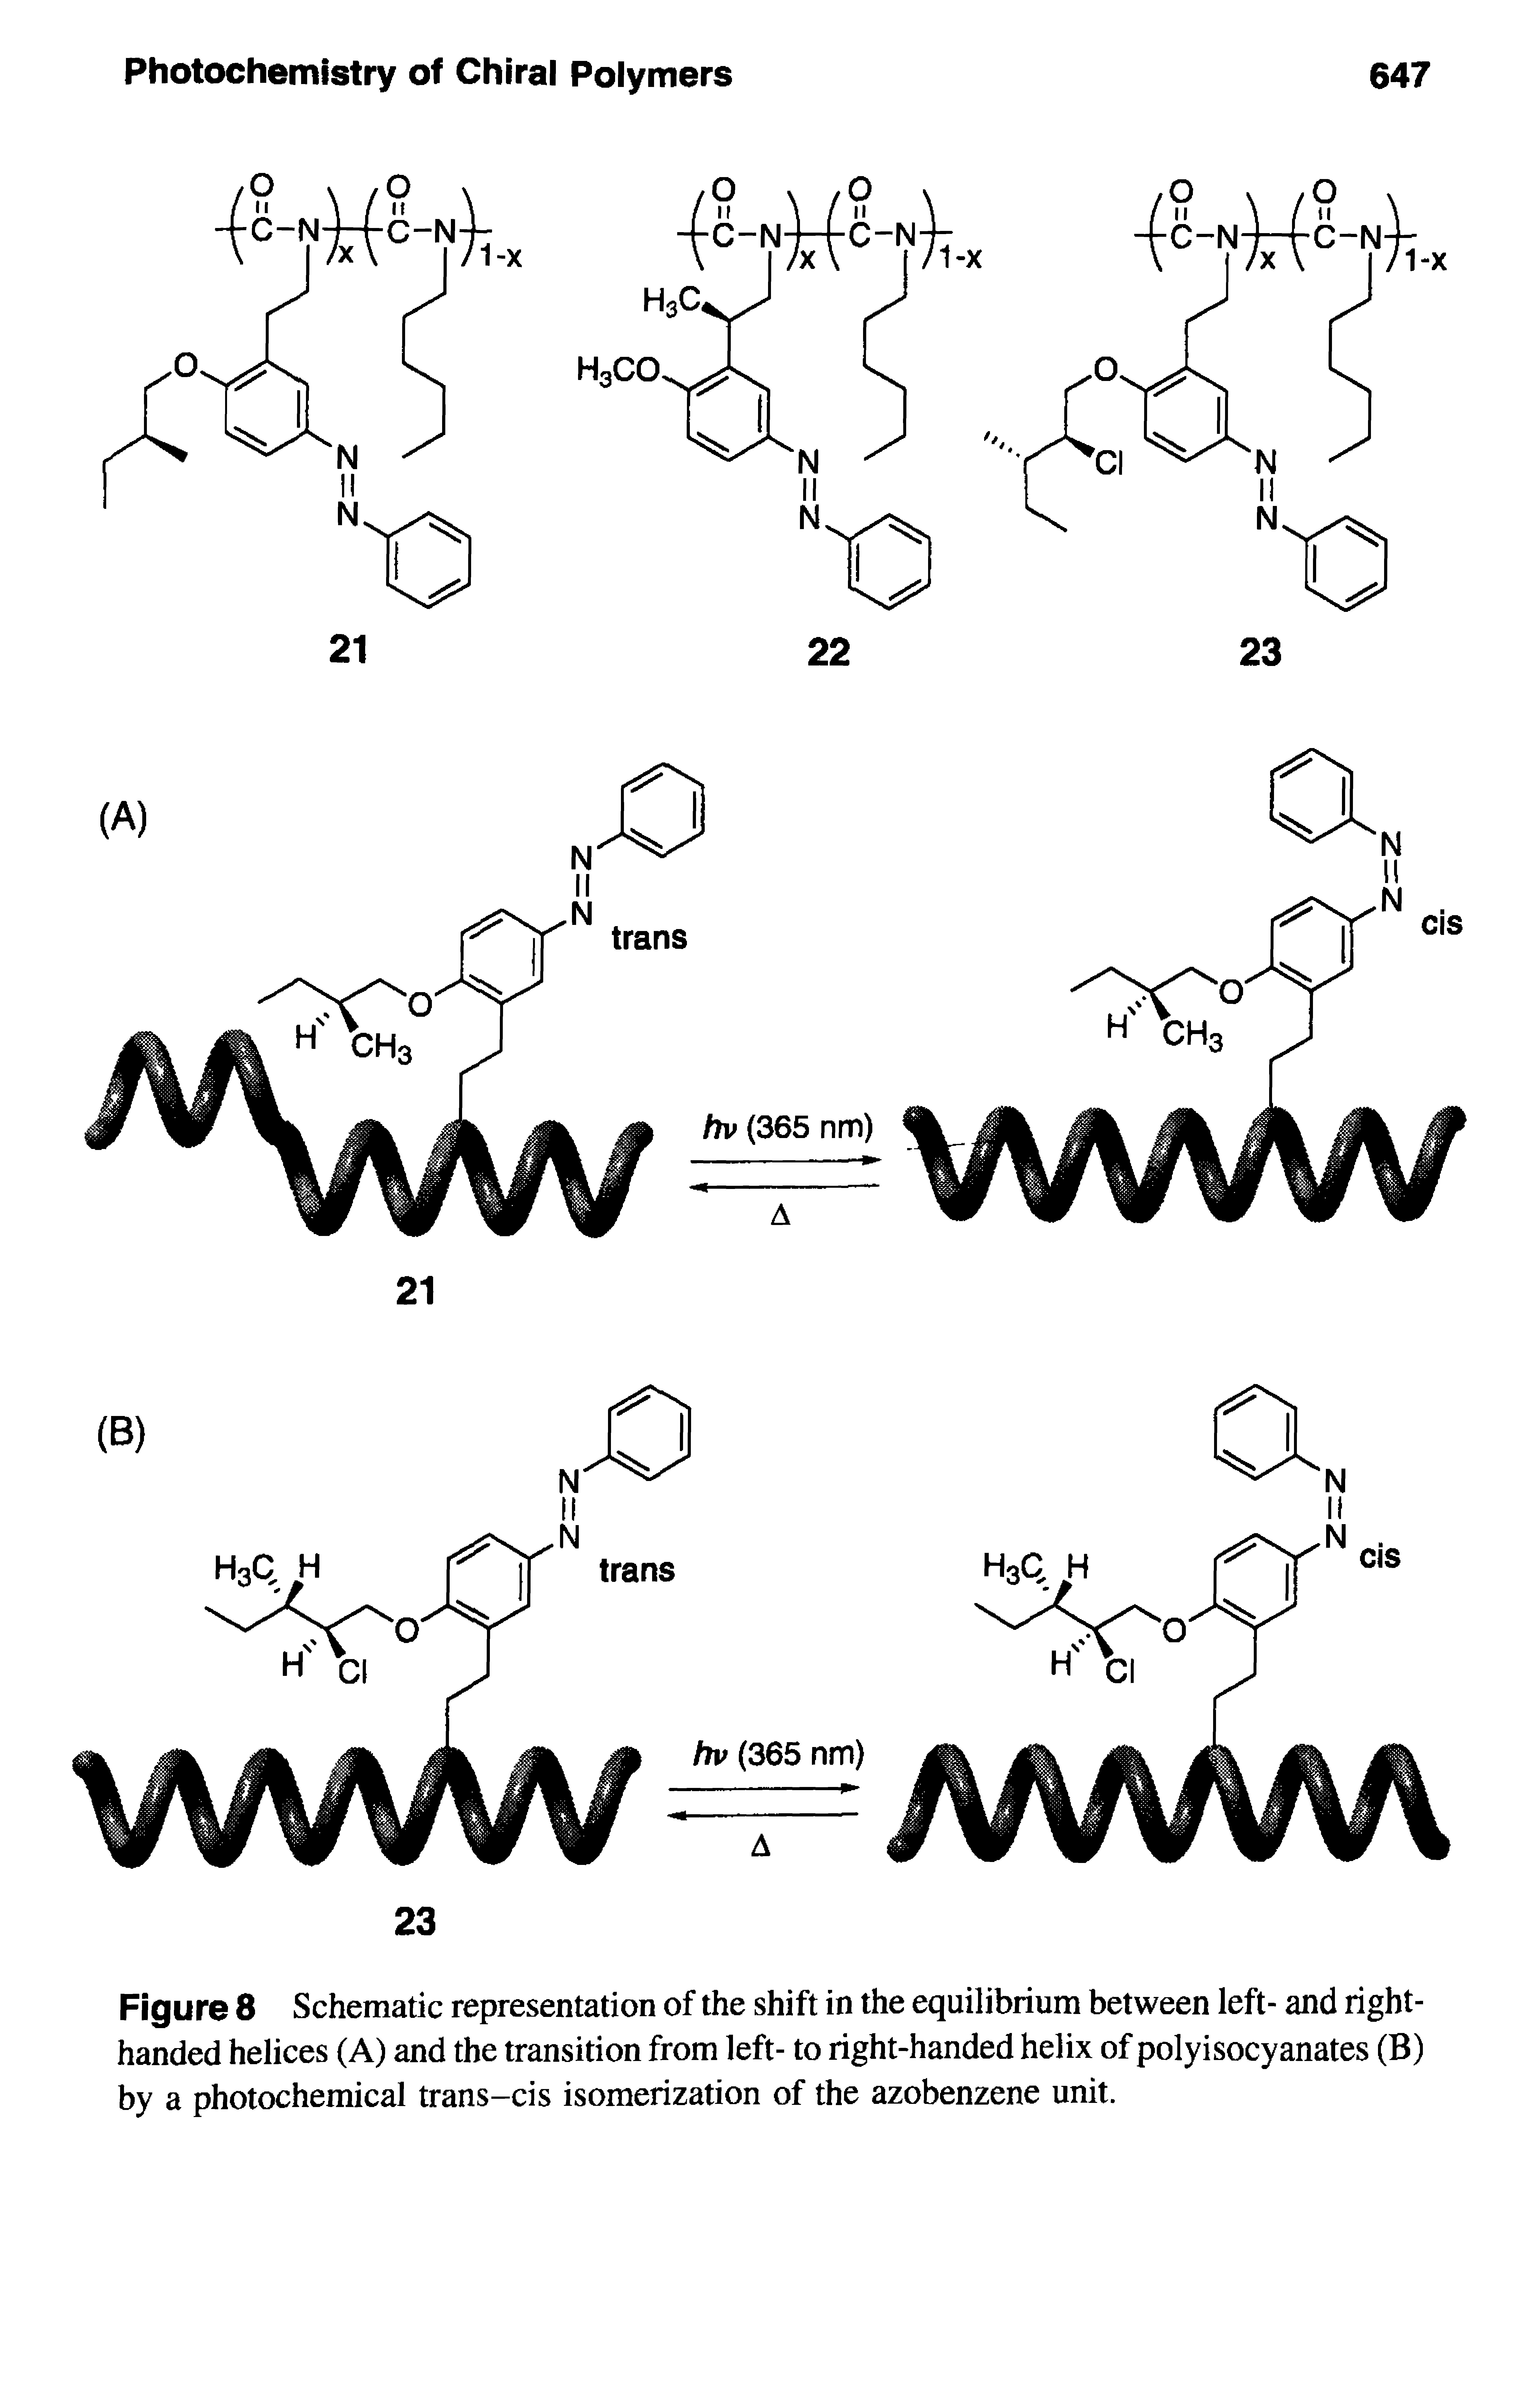 Figure 8 Schematic representation of the shift in the equilibrium between left- and right-handed helices (A) and the transition from left- to right-handed helix of poly isocyanates (B) by a photochemical trans-cis isomerization of the azobenzene unit.